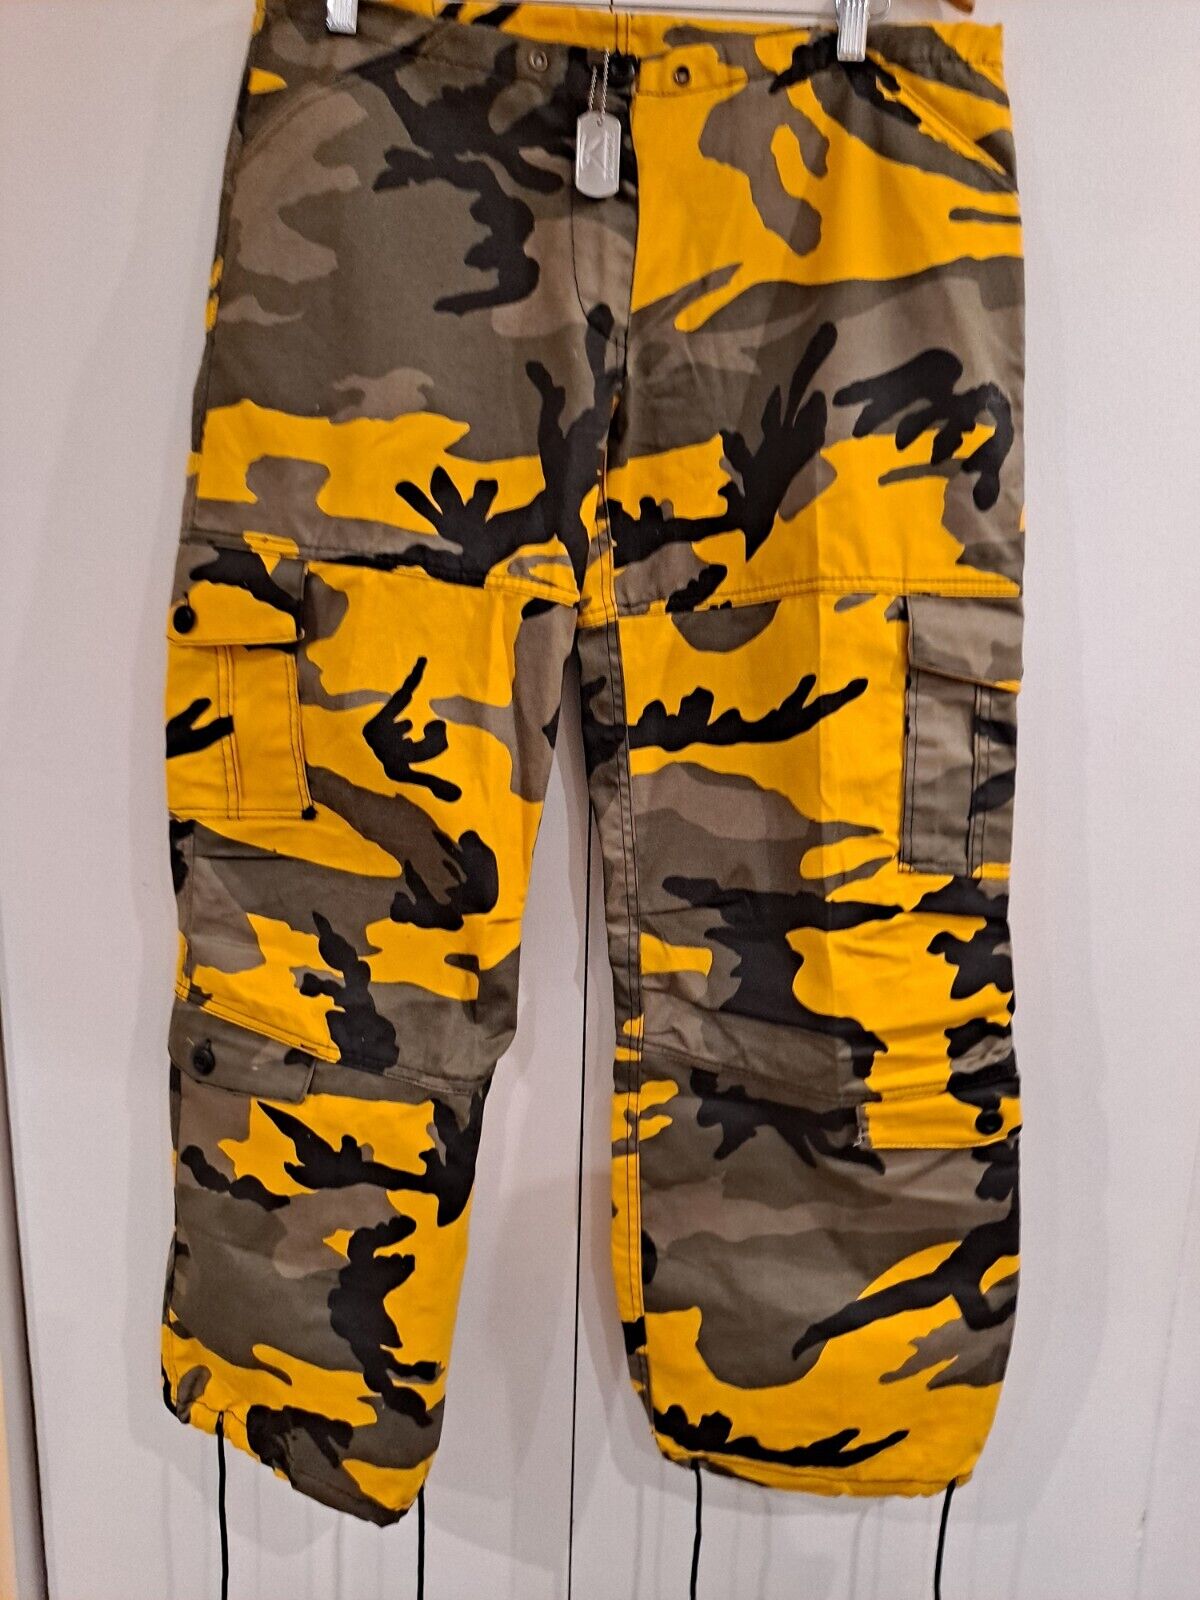 ROTHCO Combat CAMO(Yellow, Green, Black)  NWOT (Size S) Waist string missing